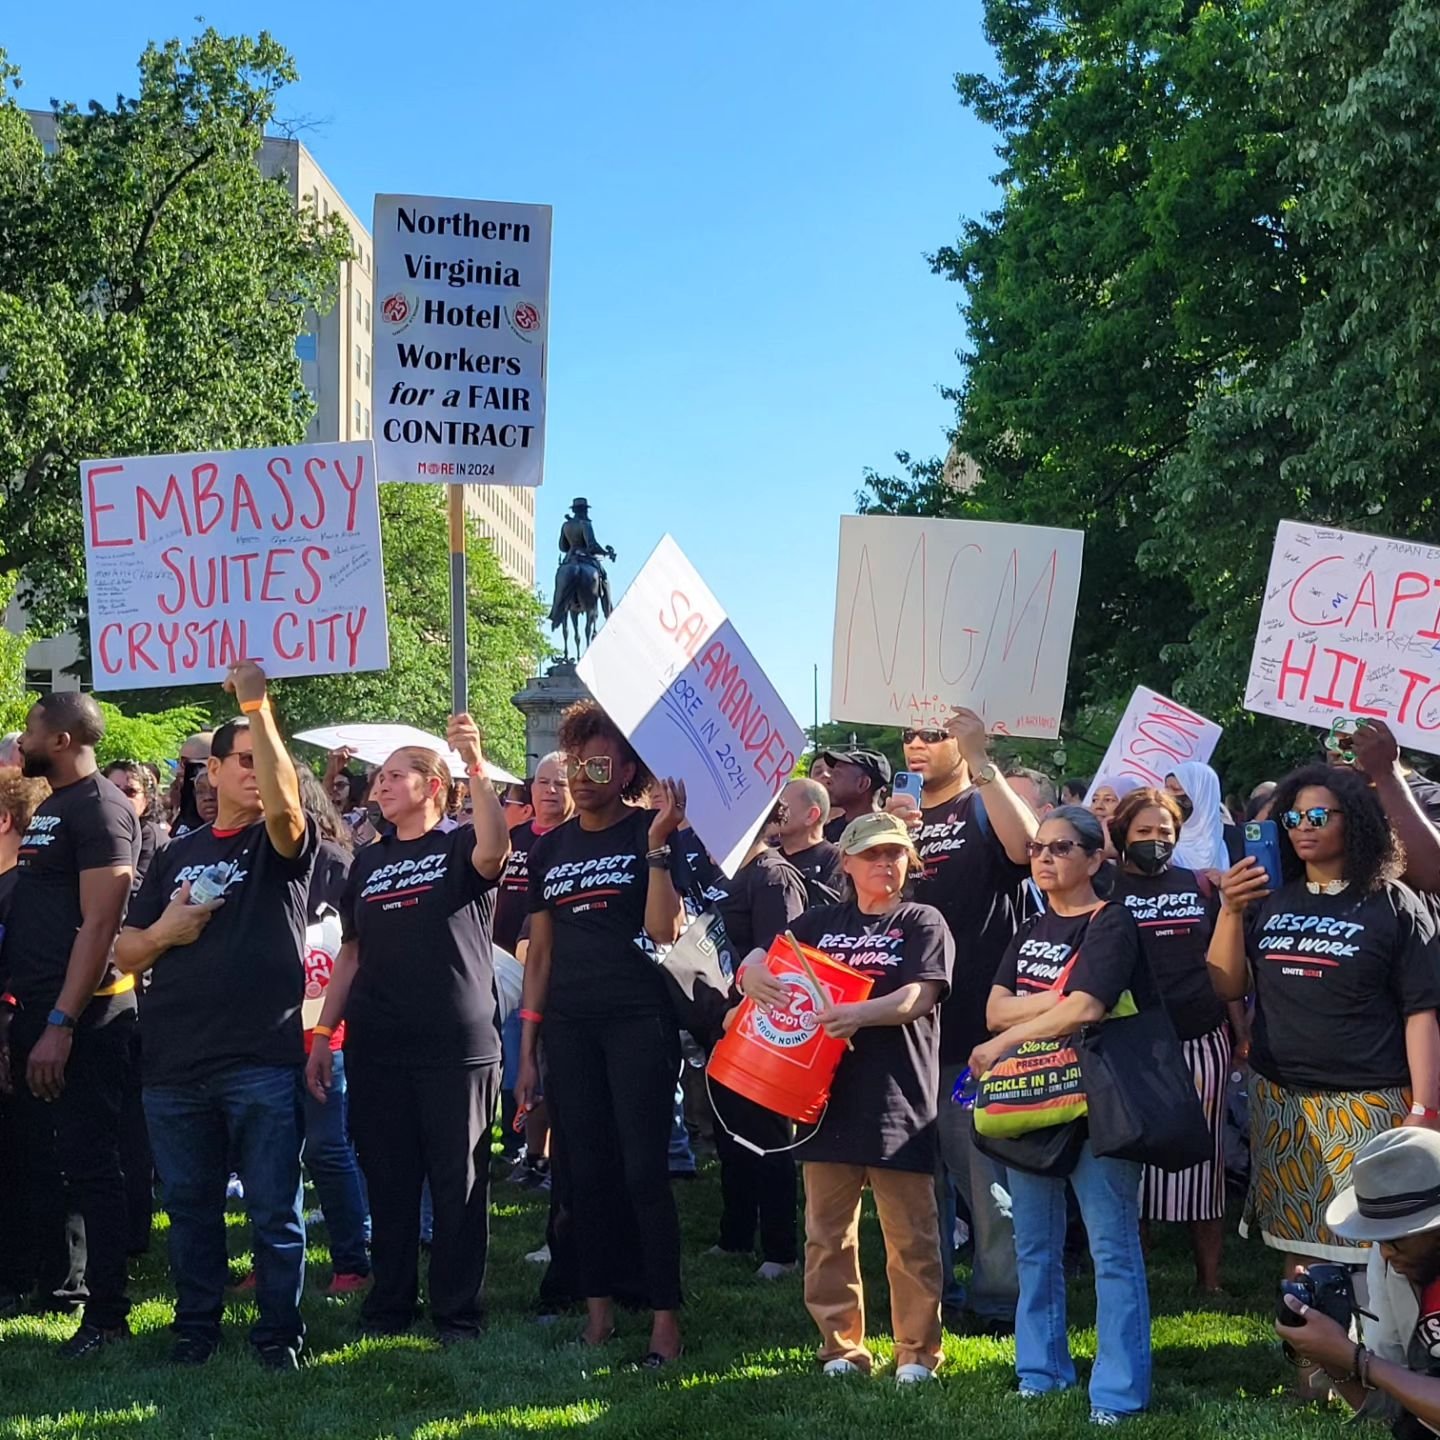 #internationalworkersday was a day of actions in #washingtondc we supported Hotel Workers, members of @UnitedHere11 and @aflcio members to demand fair wages for all workers from this industry.
#unitedhere #hotelworkers #rally #fairwages #labor #latin